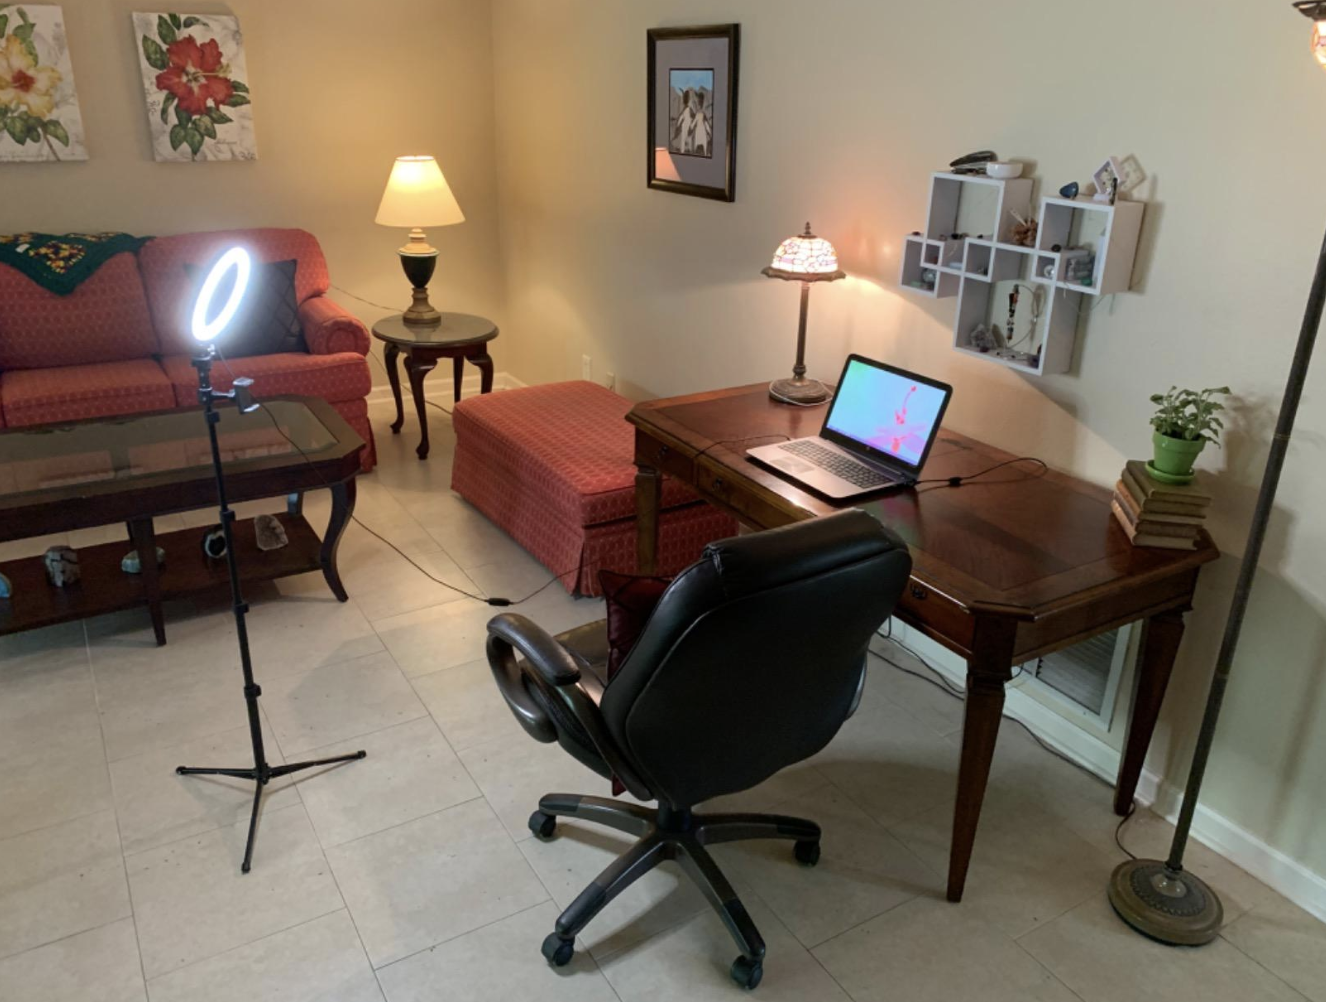 A lit selfie ring on a tripod pointing at a reviewer&#x27;s desk set up 